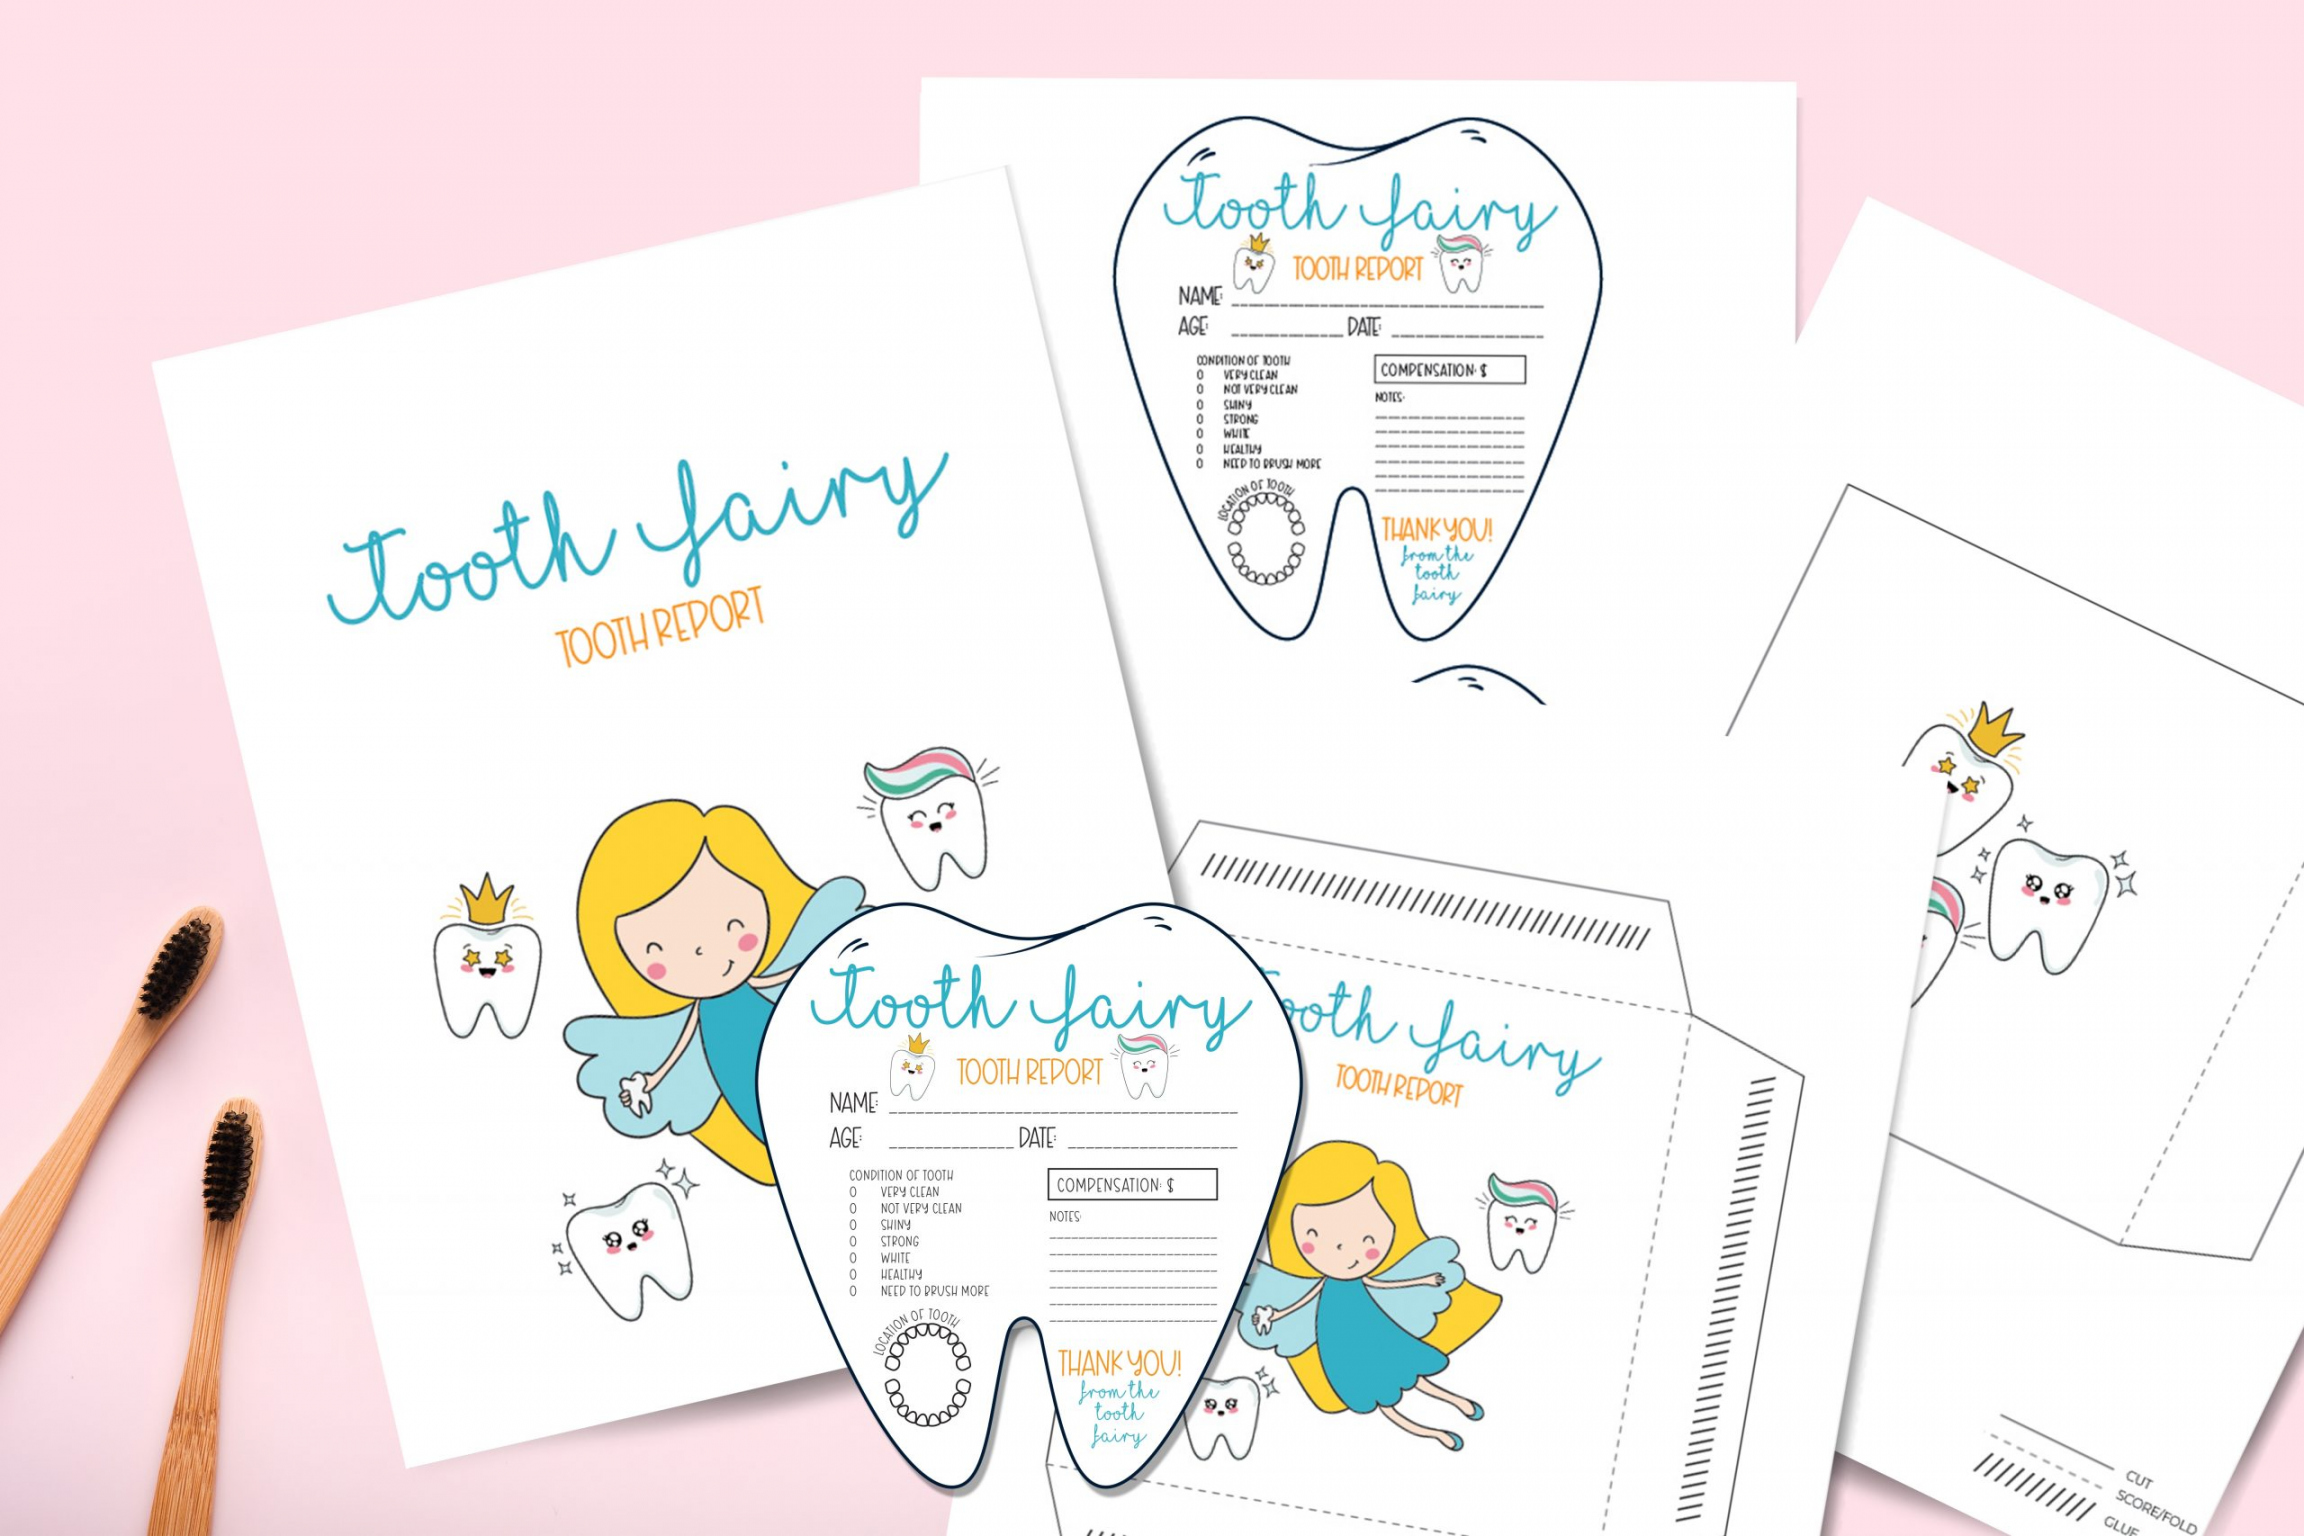 Free Tooth Fairy Printable - Printable - FREE Tooth Fairy Printable Note & Receipt For Extra Magic